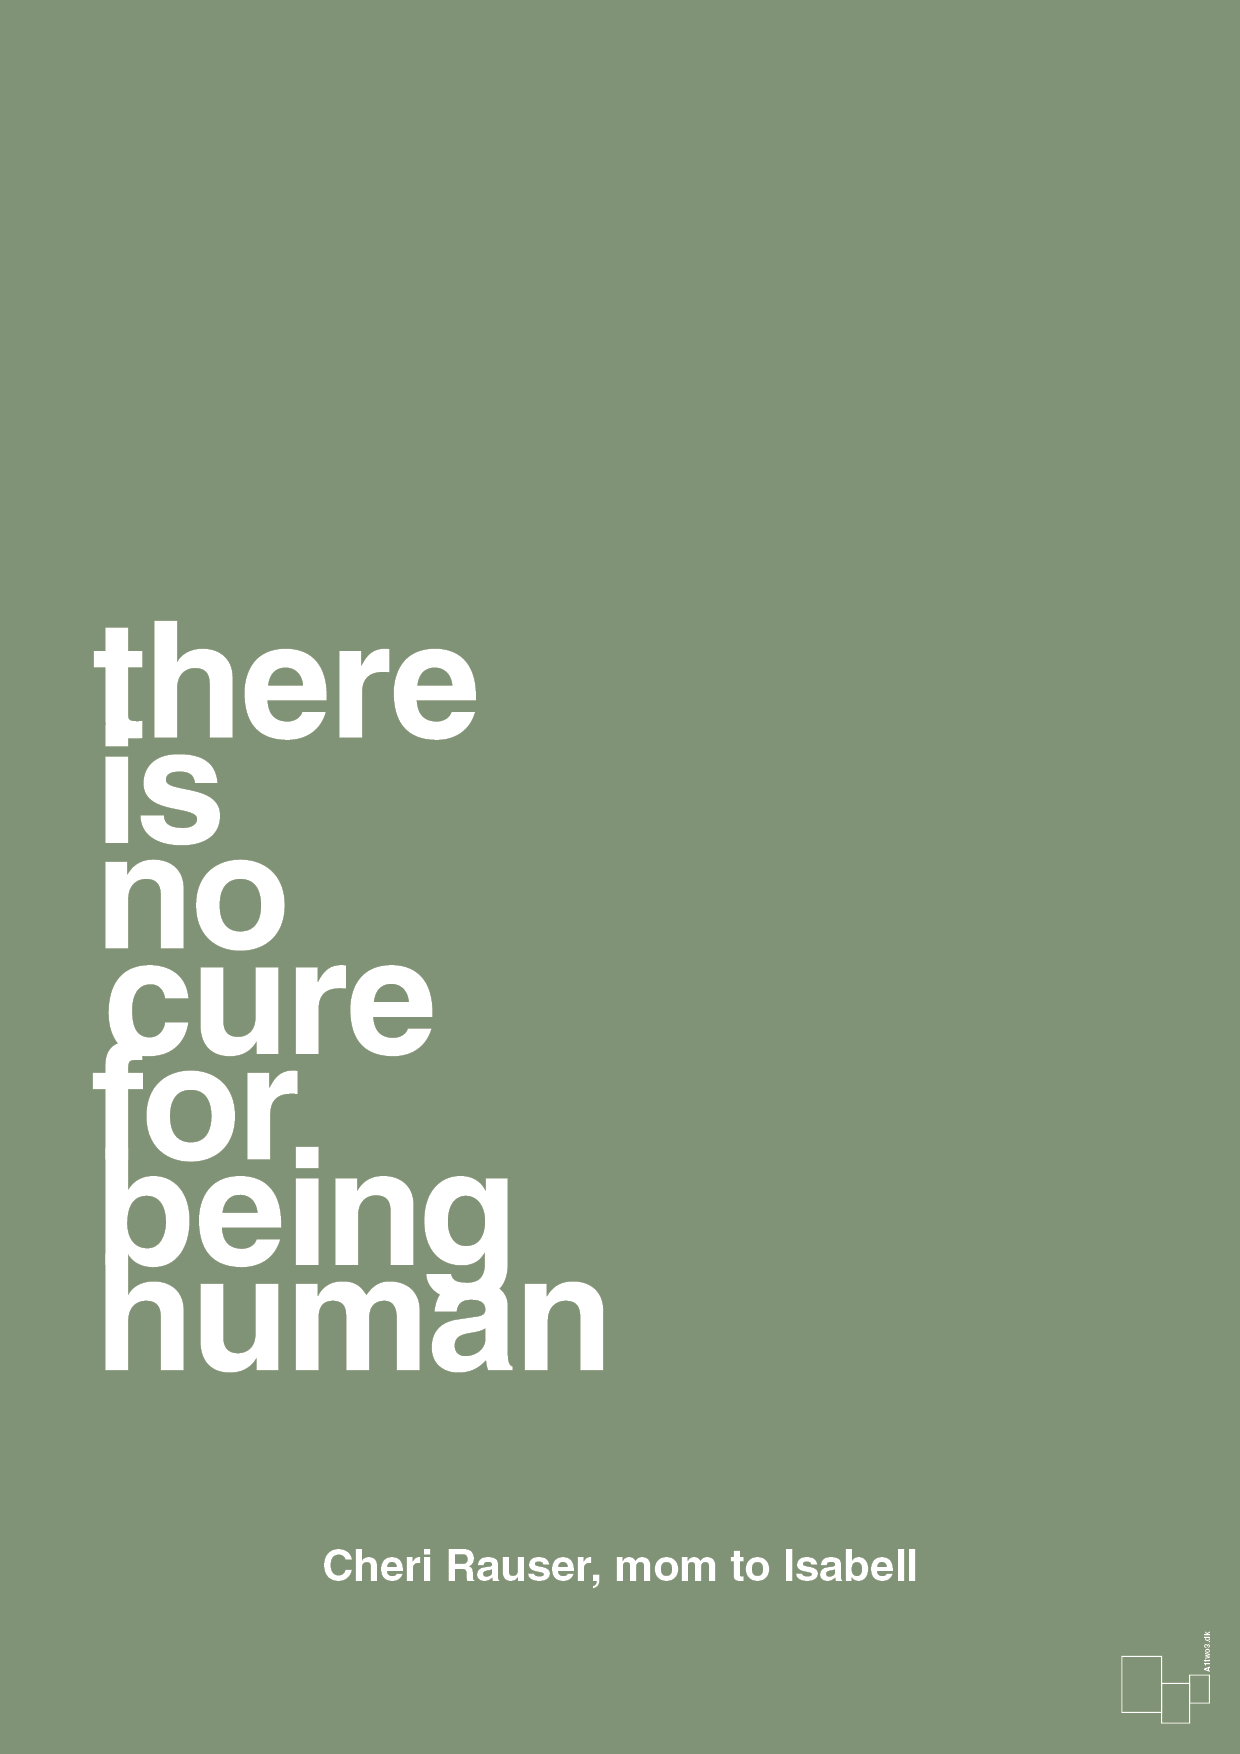 there is no cure for being human - Plakat med Samfund i Jade